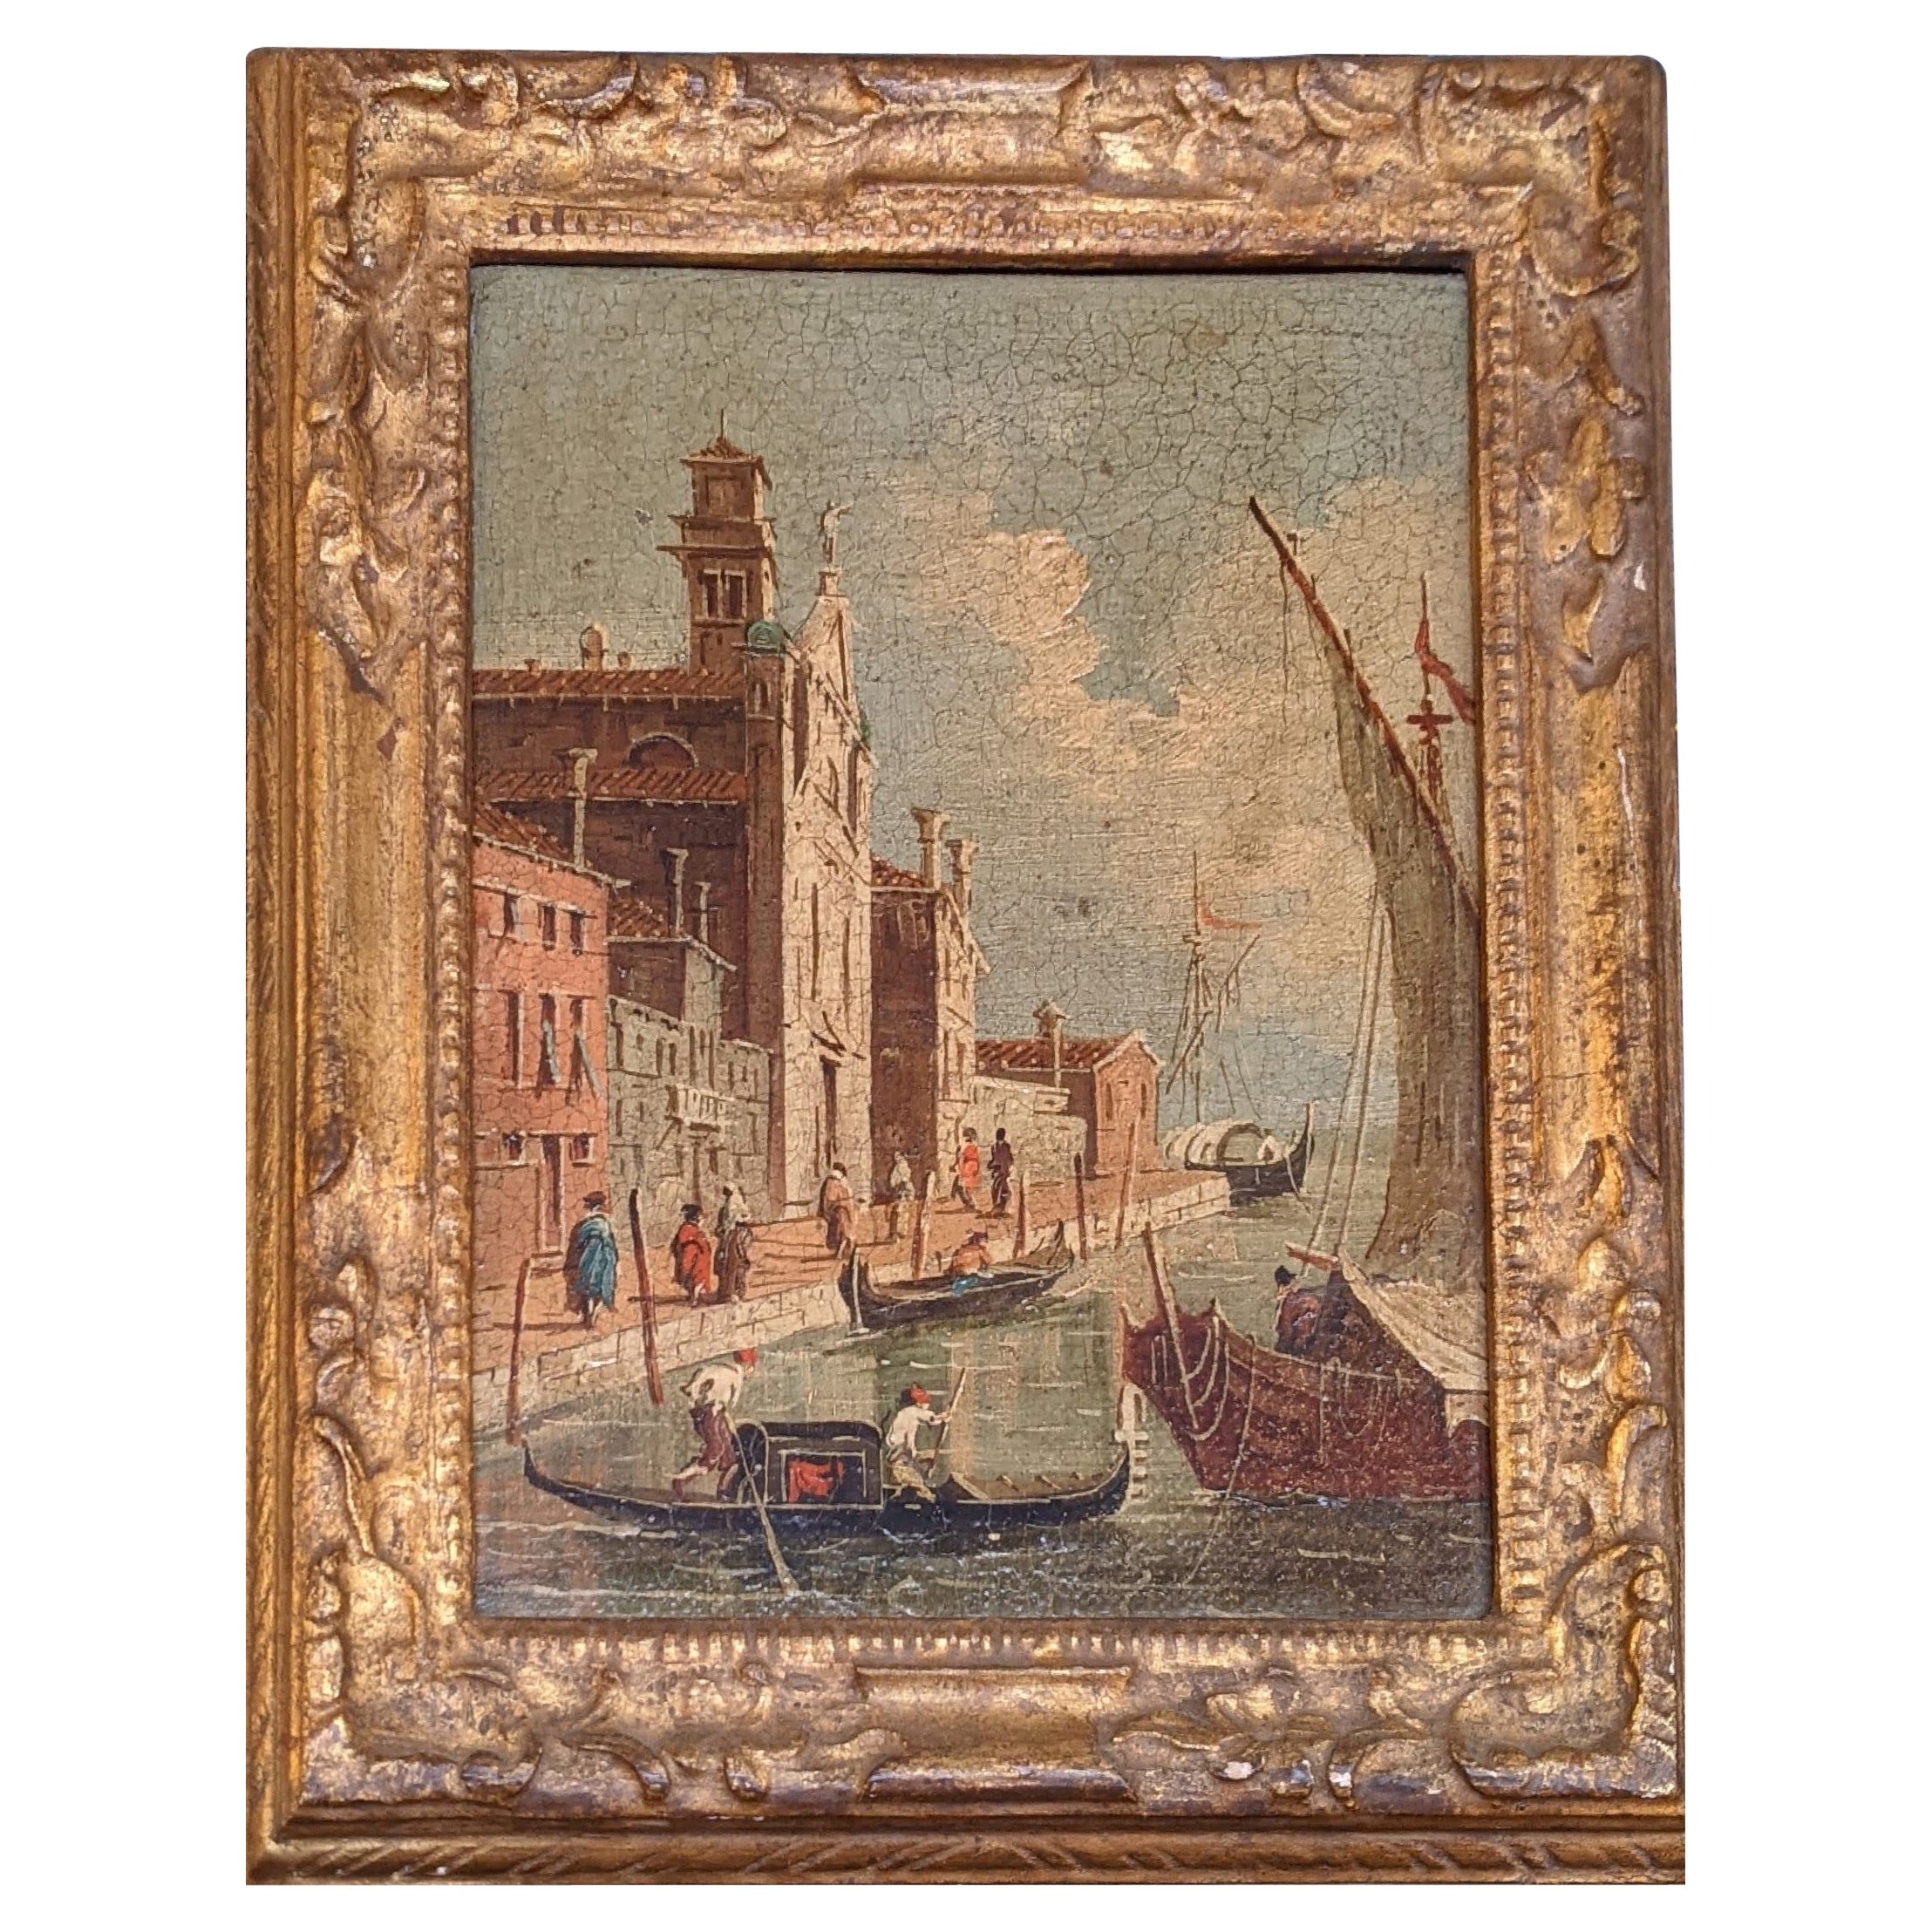 Oil Painting on Canvas with Gilded Frame, Venice, Early 1900s